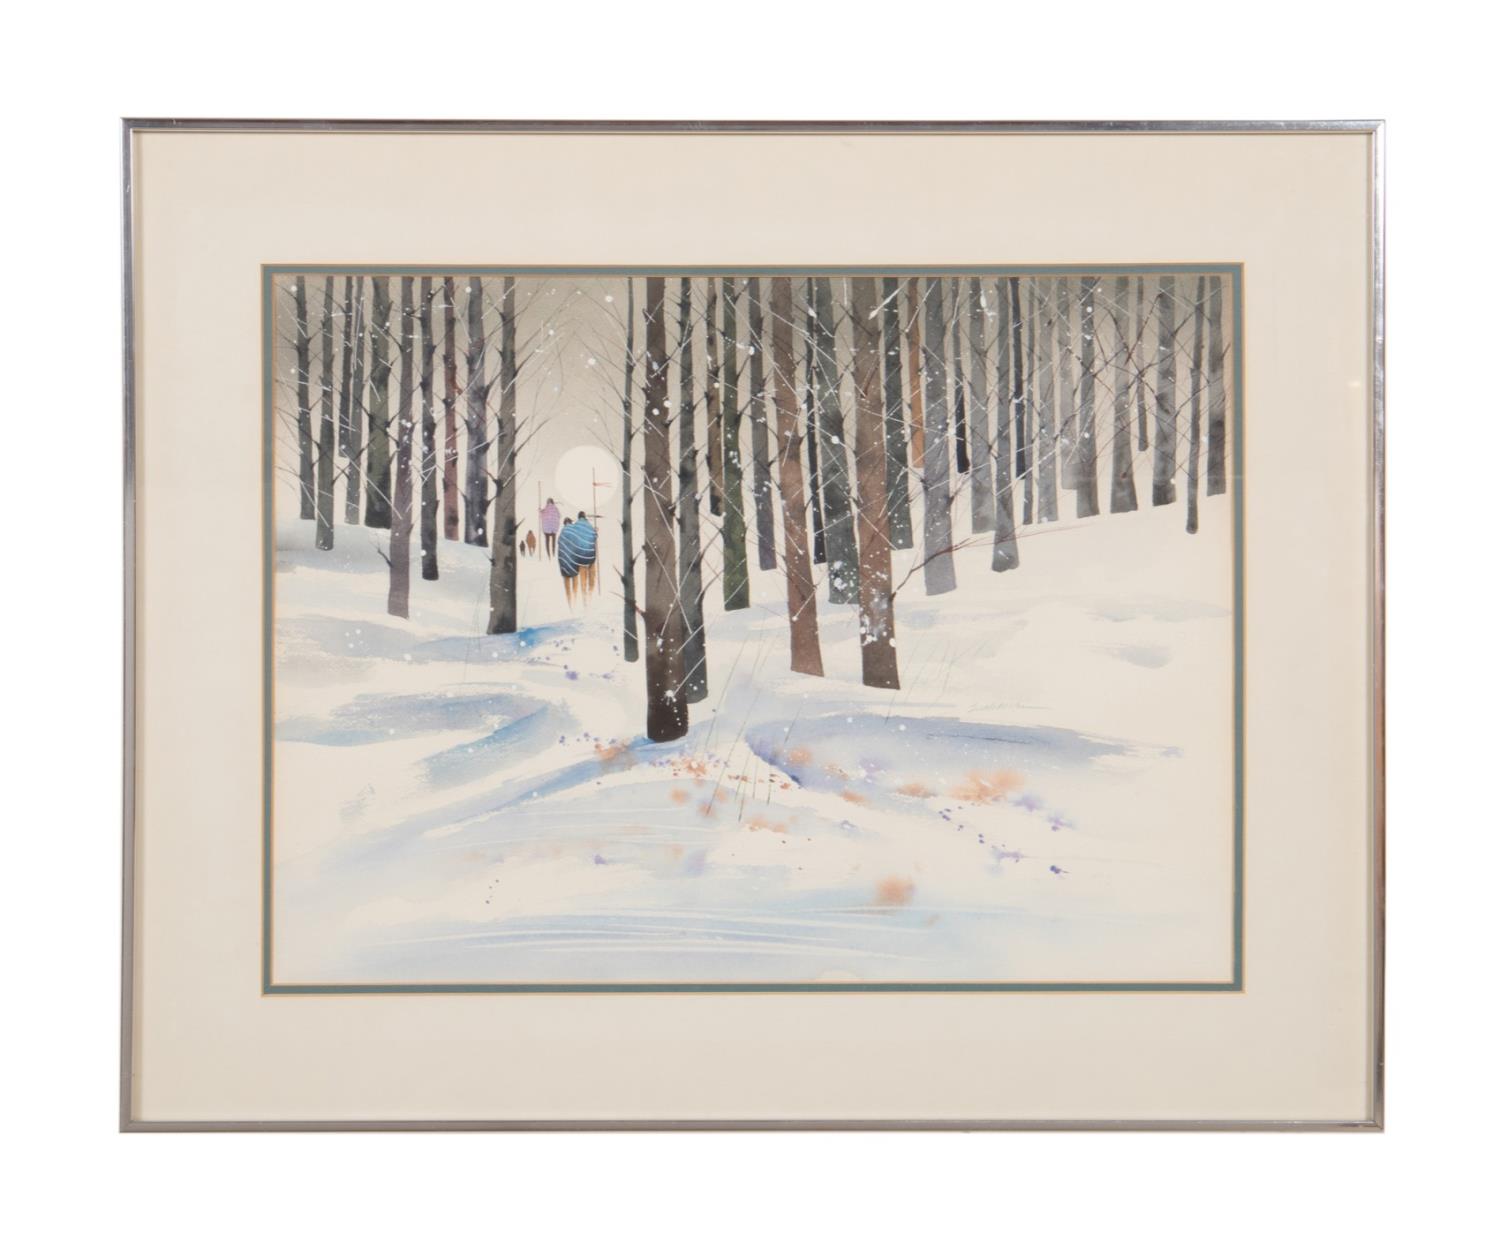 BERT SEABOURN ON THE TRAIL WATERCOLOR 354d49